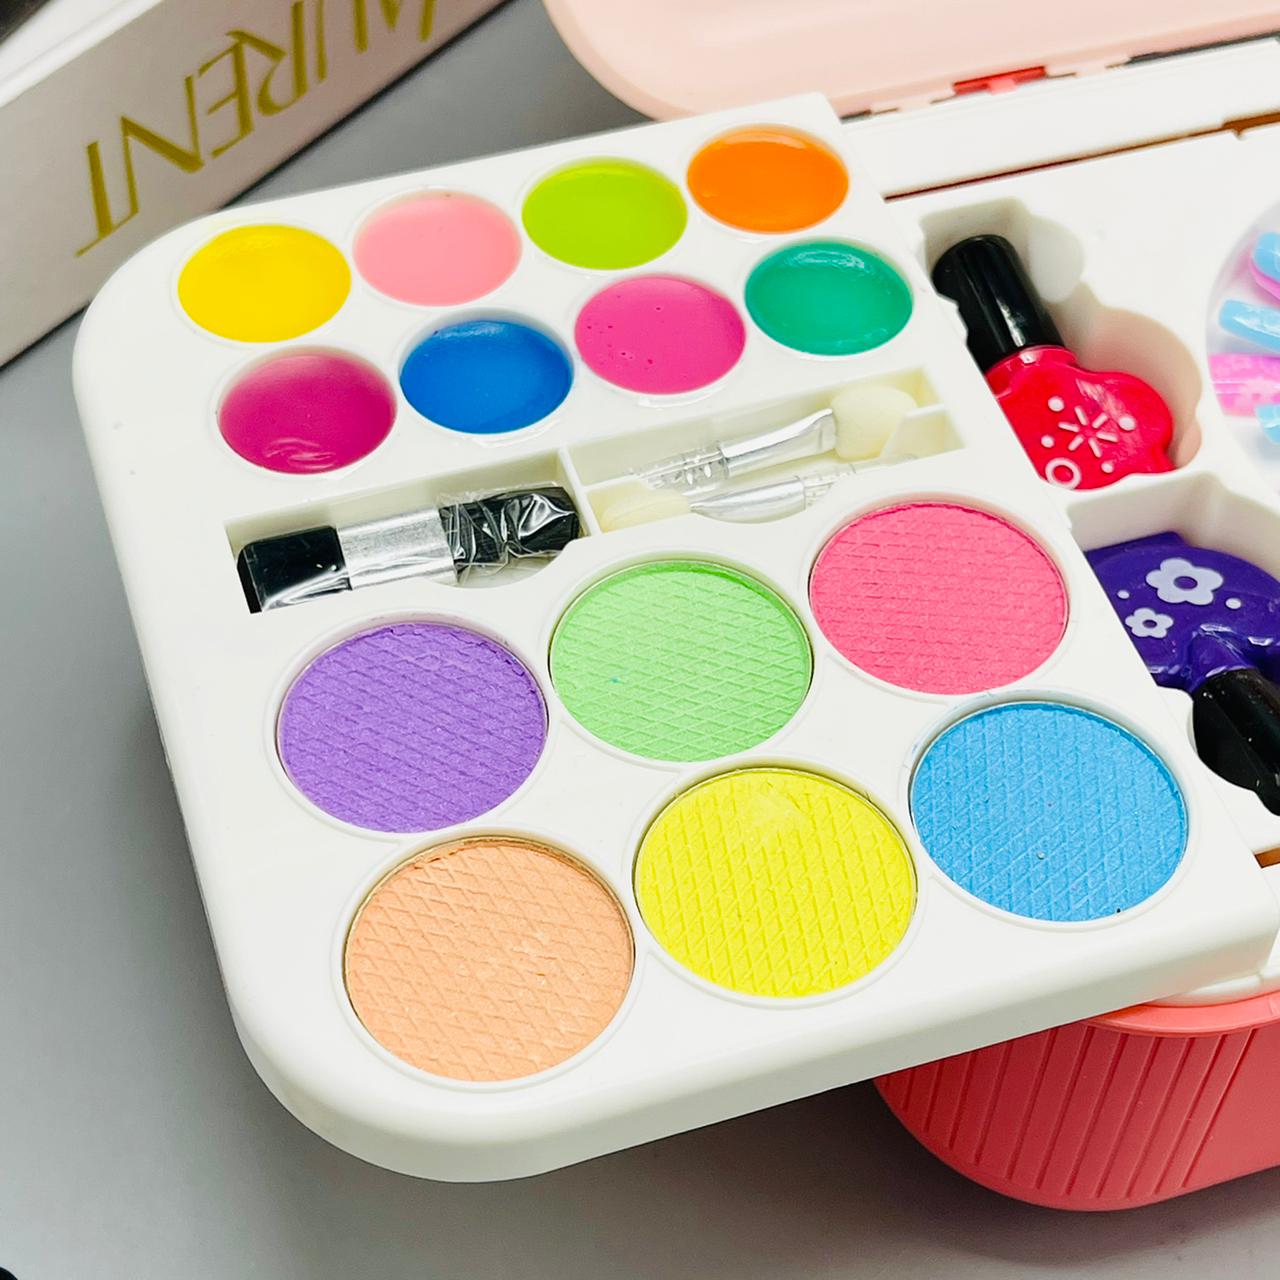 2in1 Cosmetic-Girls Set Of Makeup